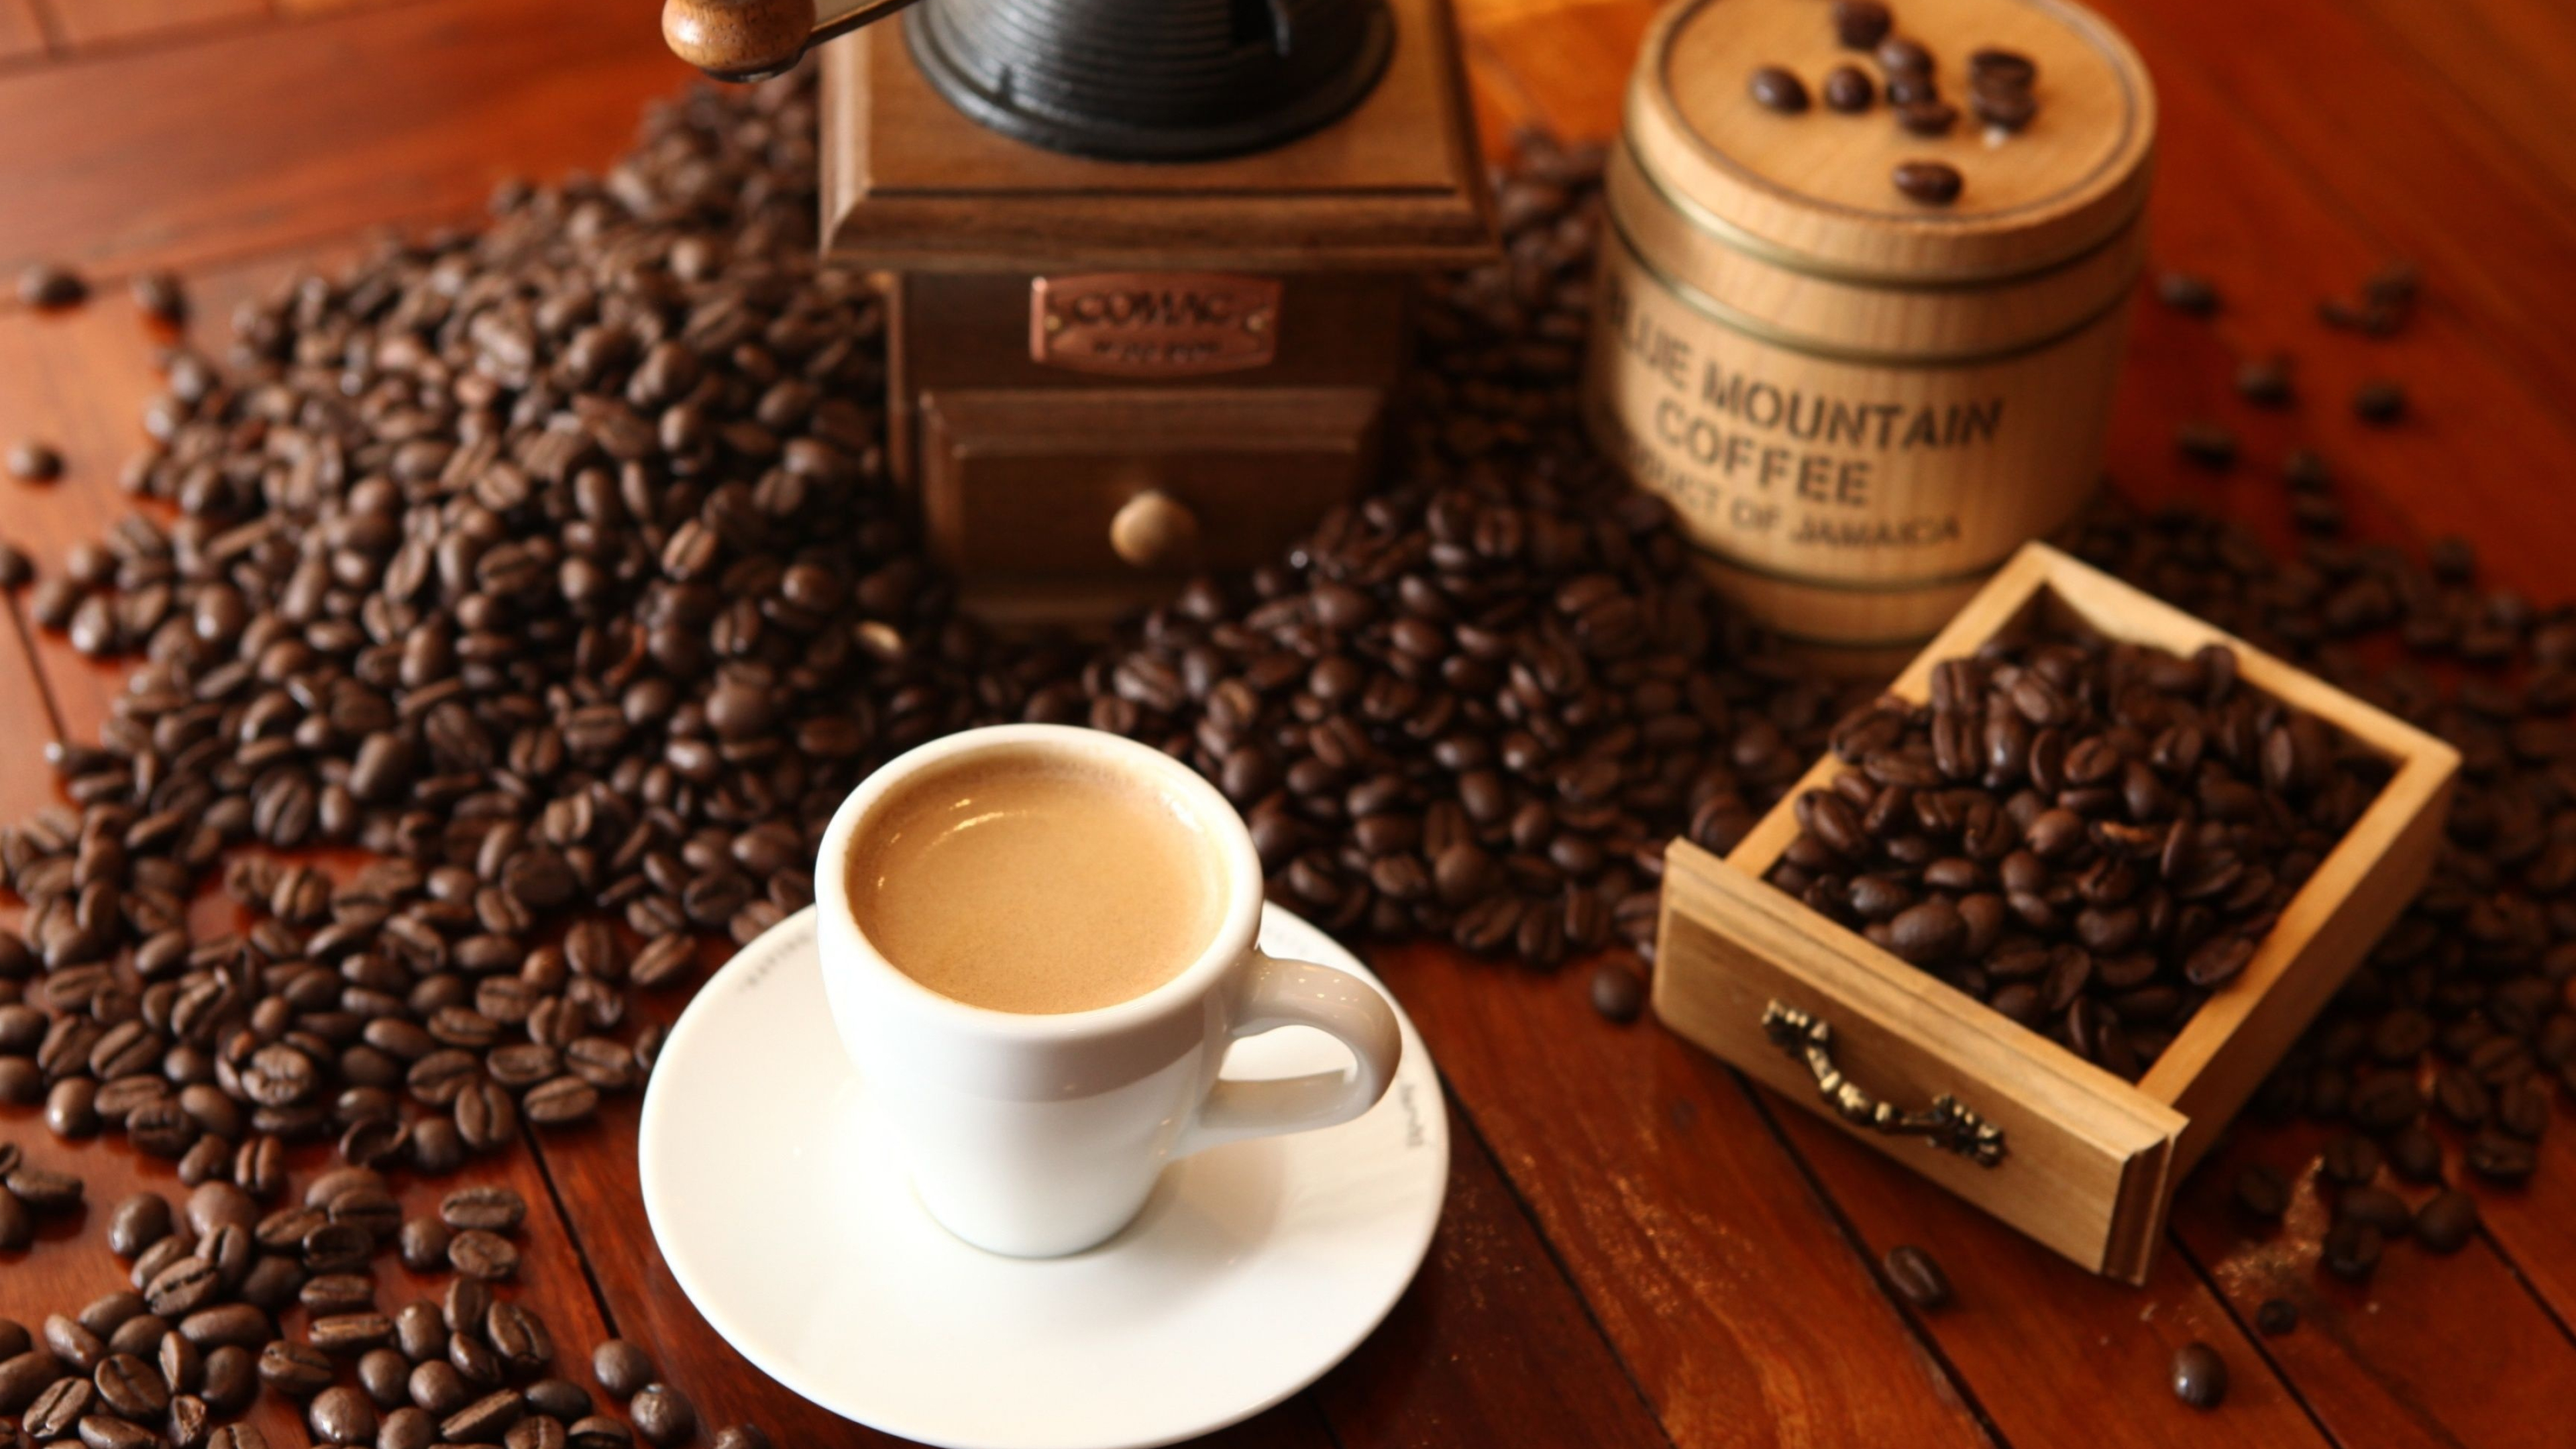 Coffee: A cup for hot drink, Dishware, Hot beverages. 3840x2160 4K Background.